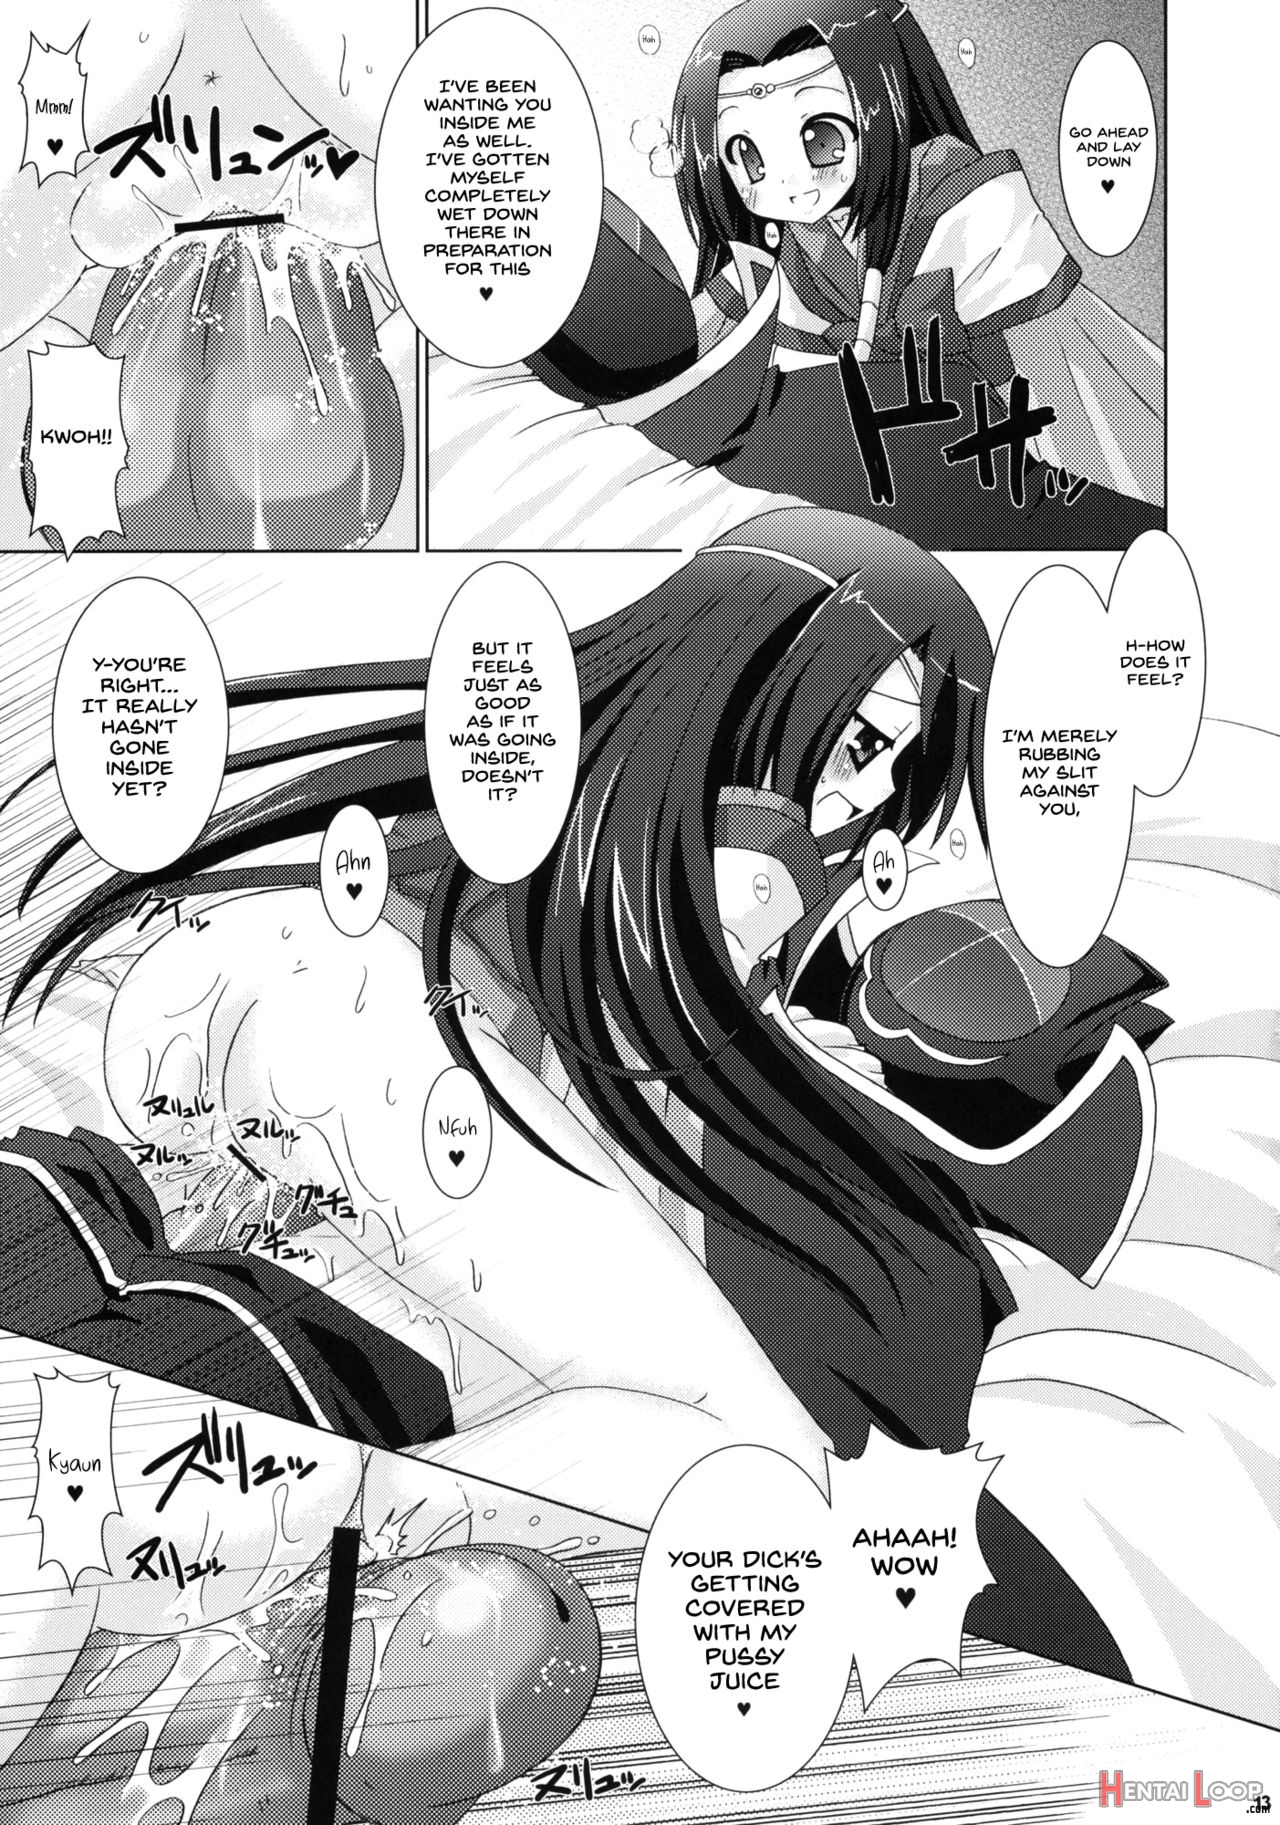 Kouhime Kyouhime page 13